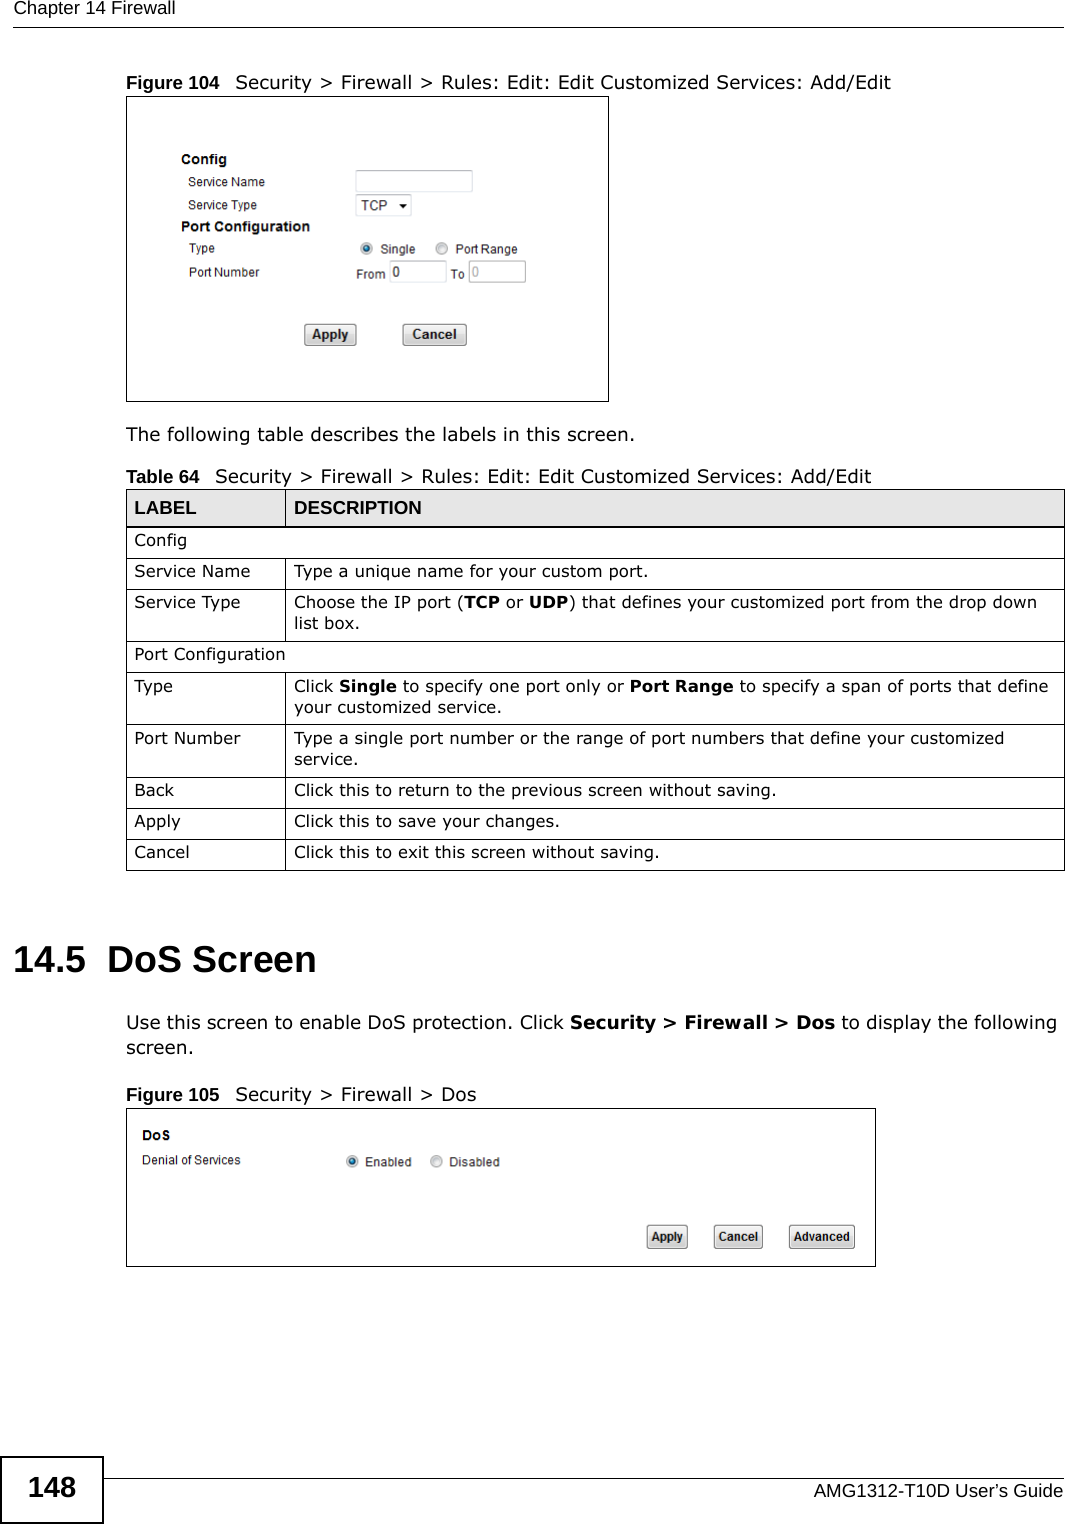 Chapter 14 FirewallAMG1312-T10D User’s Guide148Figure 104   Security &gt; Firewall &gt; Rules: Edit: Edit Customized Services: Add/EditThe following table describes the labels in this screen.14.5  DoS ScreenUse this screen to enable DoS protection. Click Security &gt; Firewall &gt; Dos to display the following screen.Figure 105   Security &gt; Firewall &gt; DosTable 64   Security &gt; Firewall &gt; Rules: Edit: Edit Customized Services: Add/EditLABEL DESCRIPTIONConfigService Name Type a unique name for your custom port.Service Type Choose the IP port (TCP or UDP) that defines your customized port from the drop down list box.Port ConfigurationType Click Single to specify one port only or Port Range to specify a span of ports that define your customized service. Port Number Type a single port number or the range of port numbers that define your customized service.Back Click this to return to the previous screen without saving.Apply Click this to save your changes.Cancel Click this to exit this screen without saving.